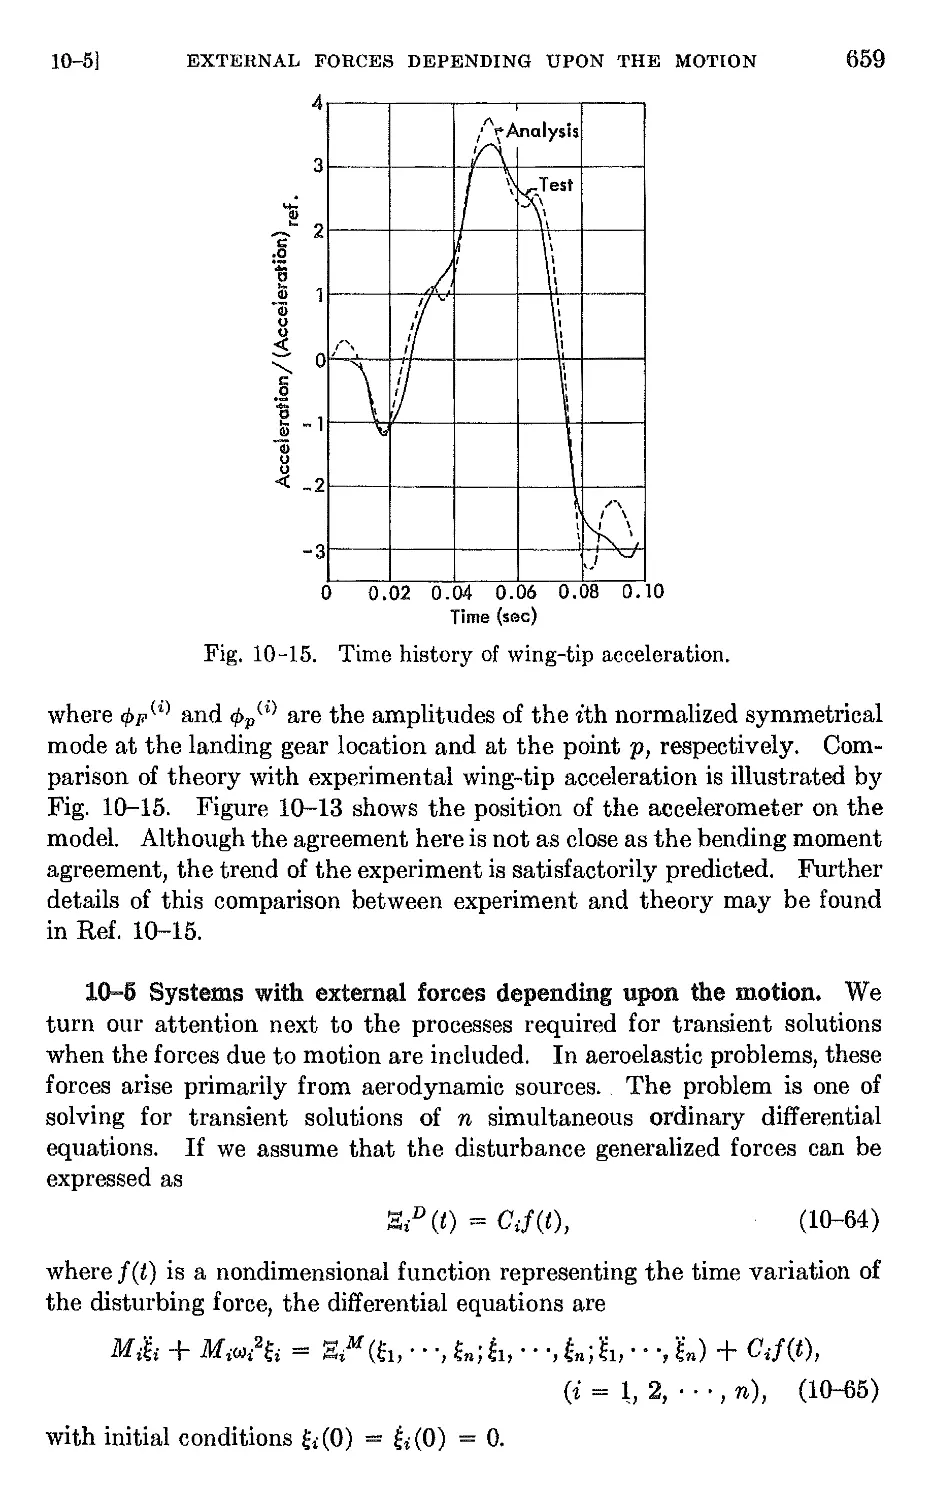 10.5 Systems with external forces depending upon the motion